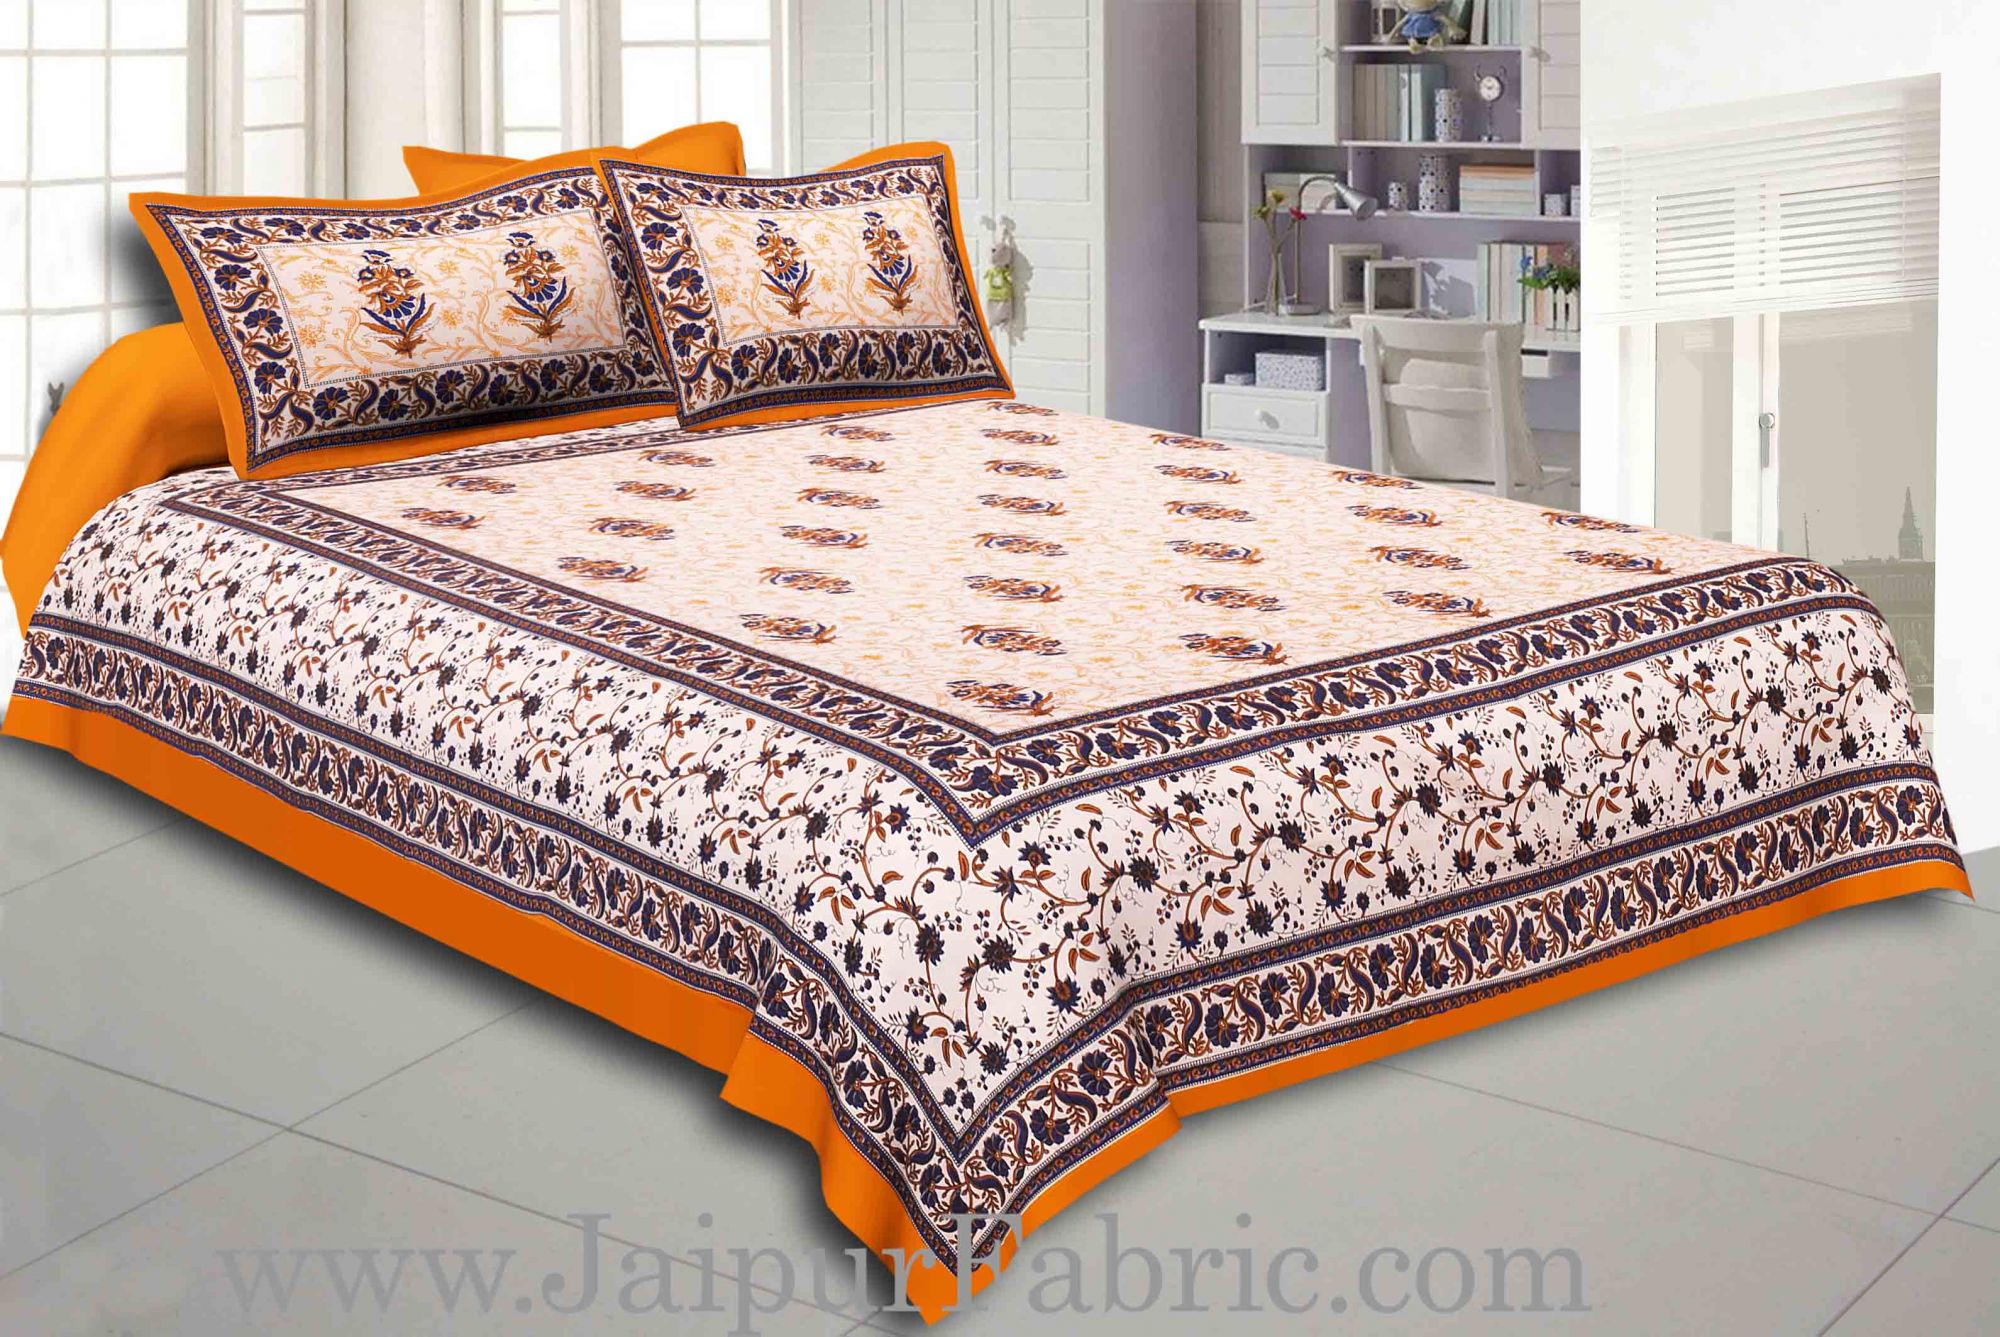 Yellow Border With Cream Base With  Small Mughal Print Cotton Double Bedsheet With Pillow Cover